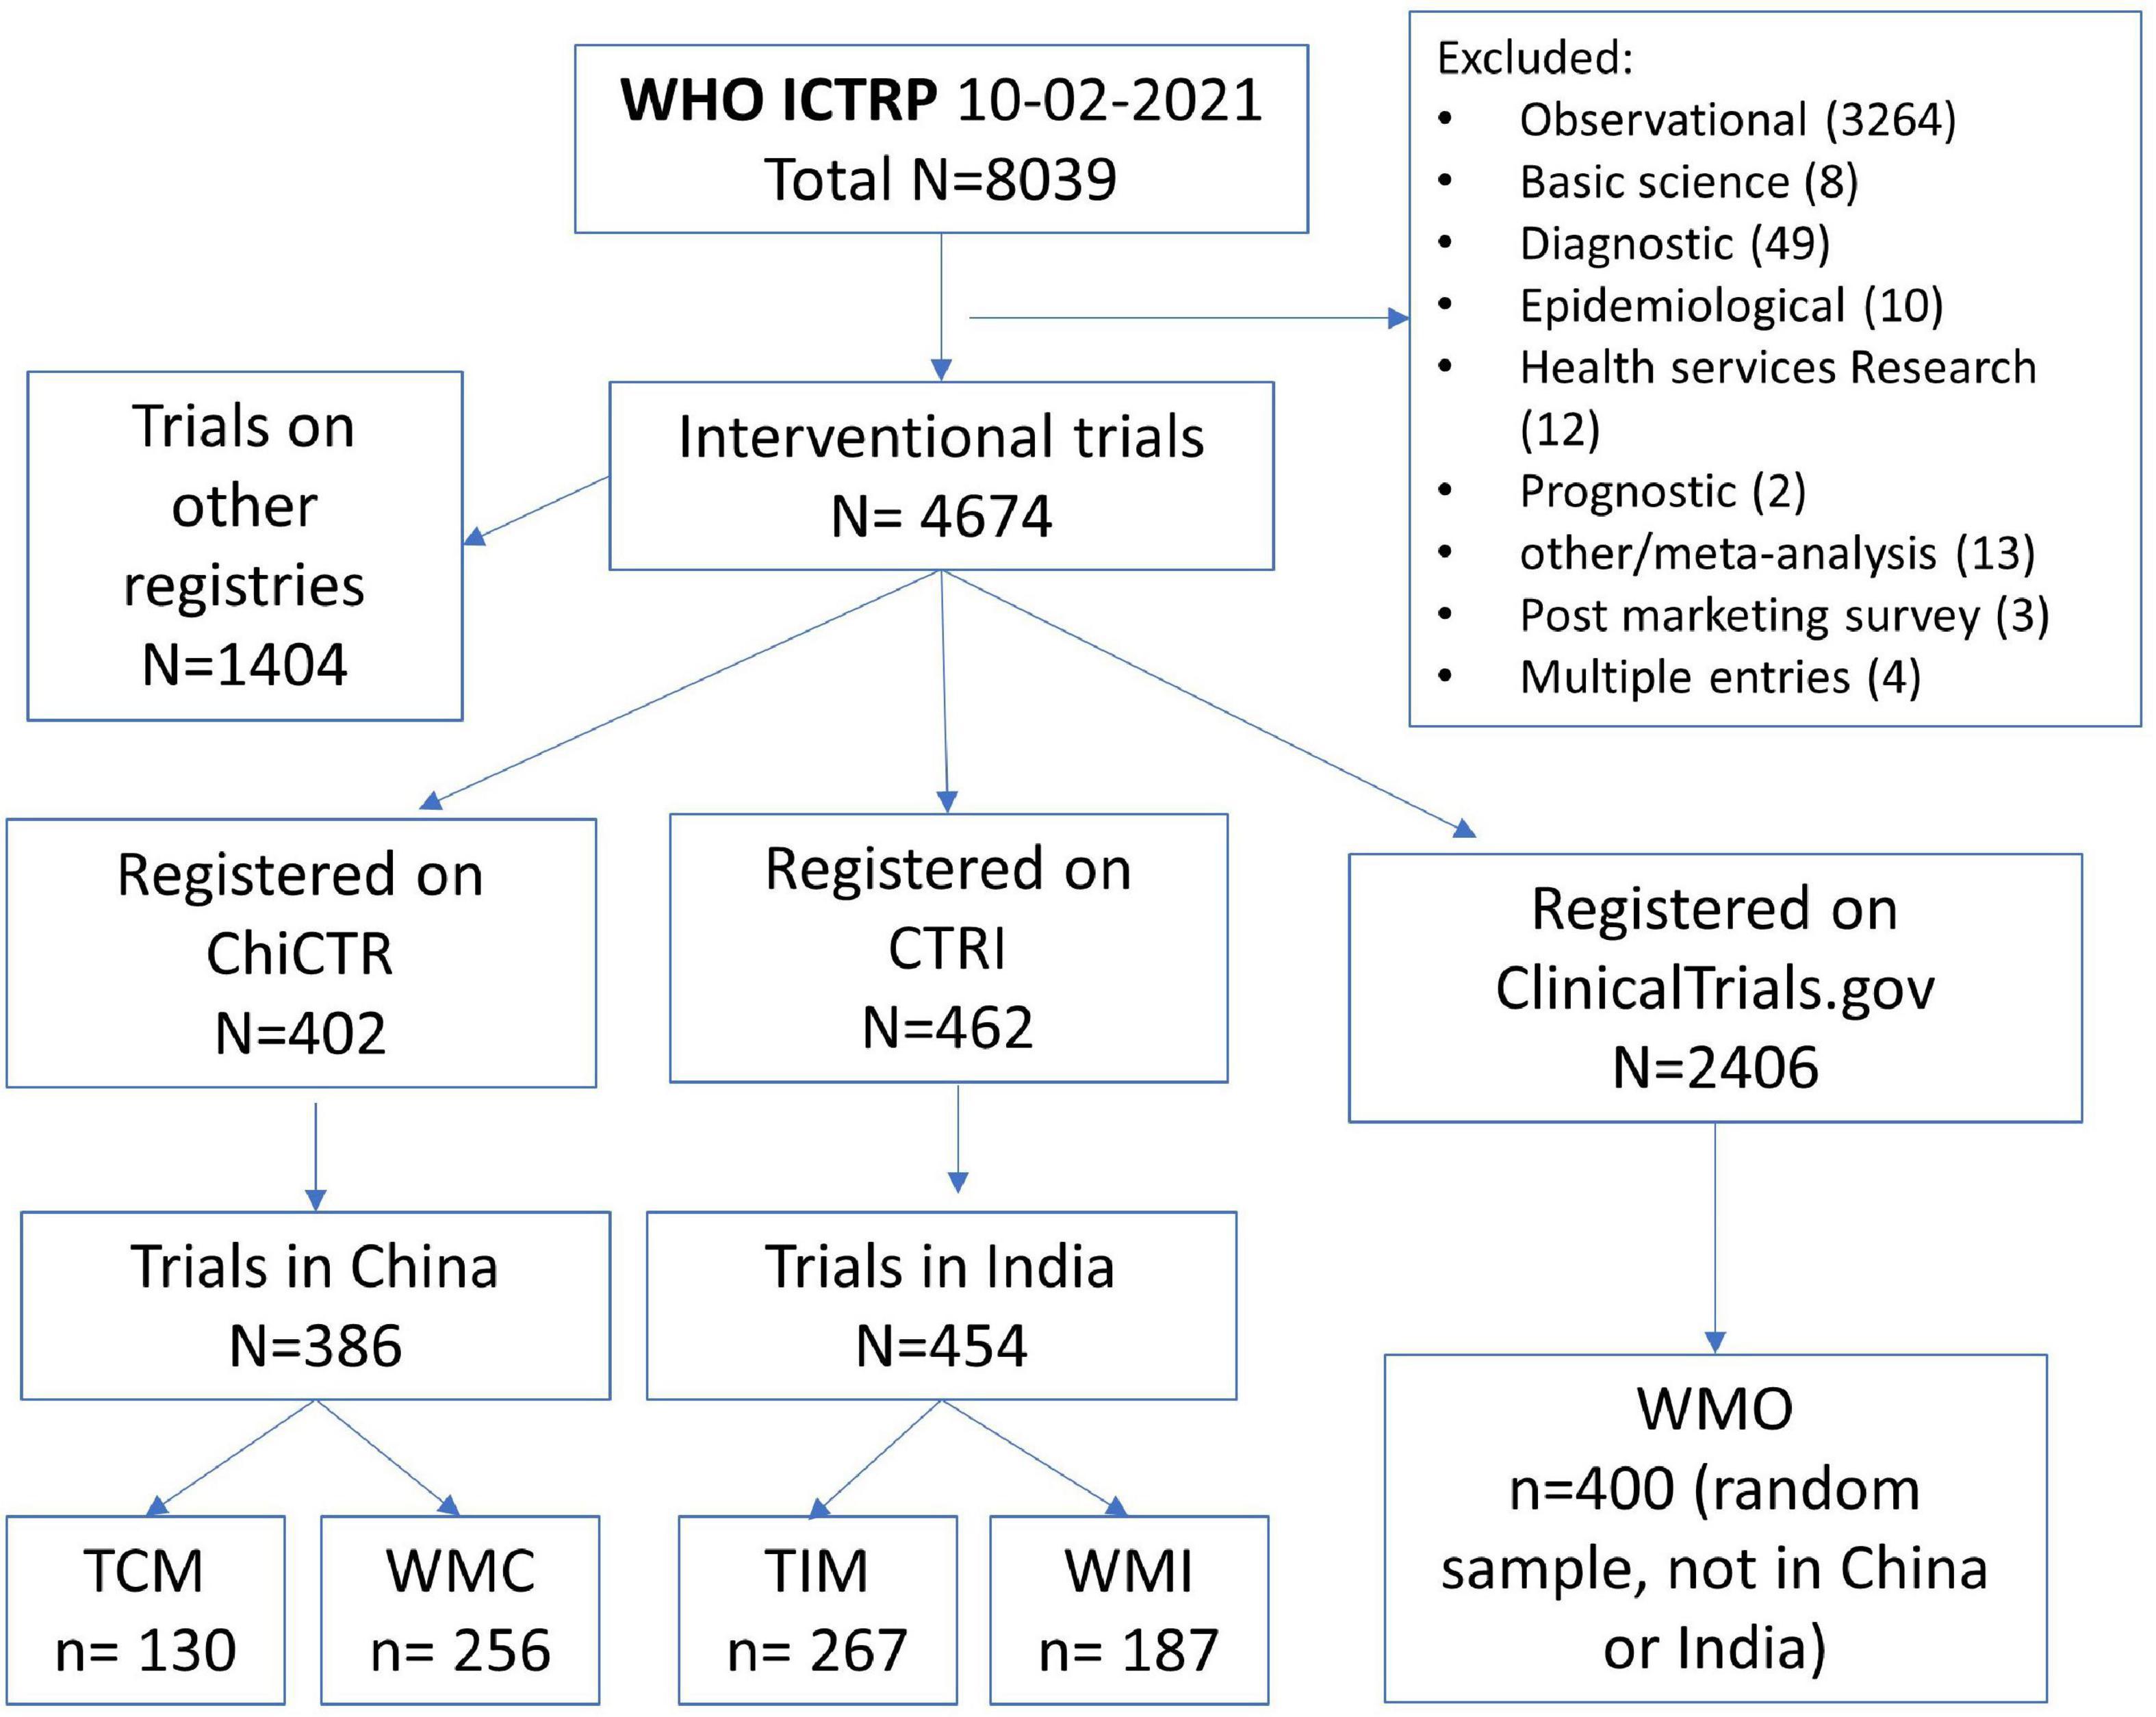 Characteristics and result reporting of registered COVID-19 clinical trials of Chinese and Indian traditional medicine: A comparative analysis